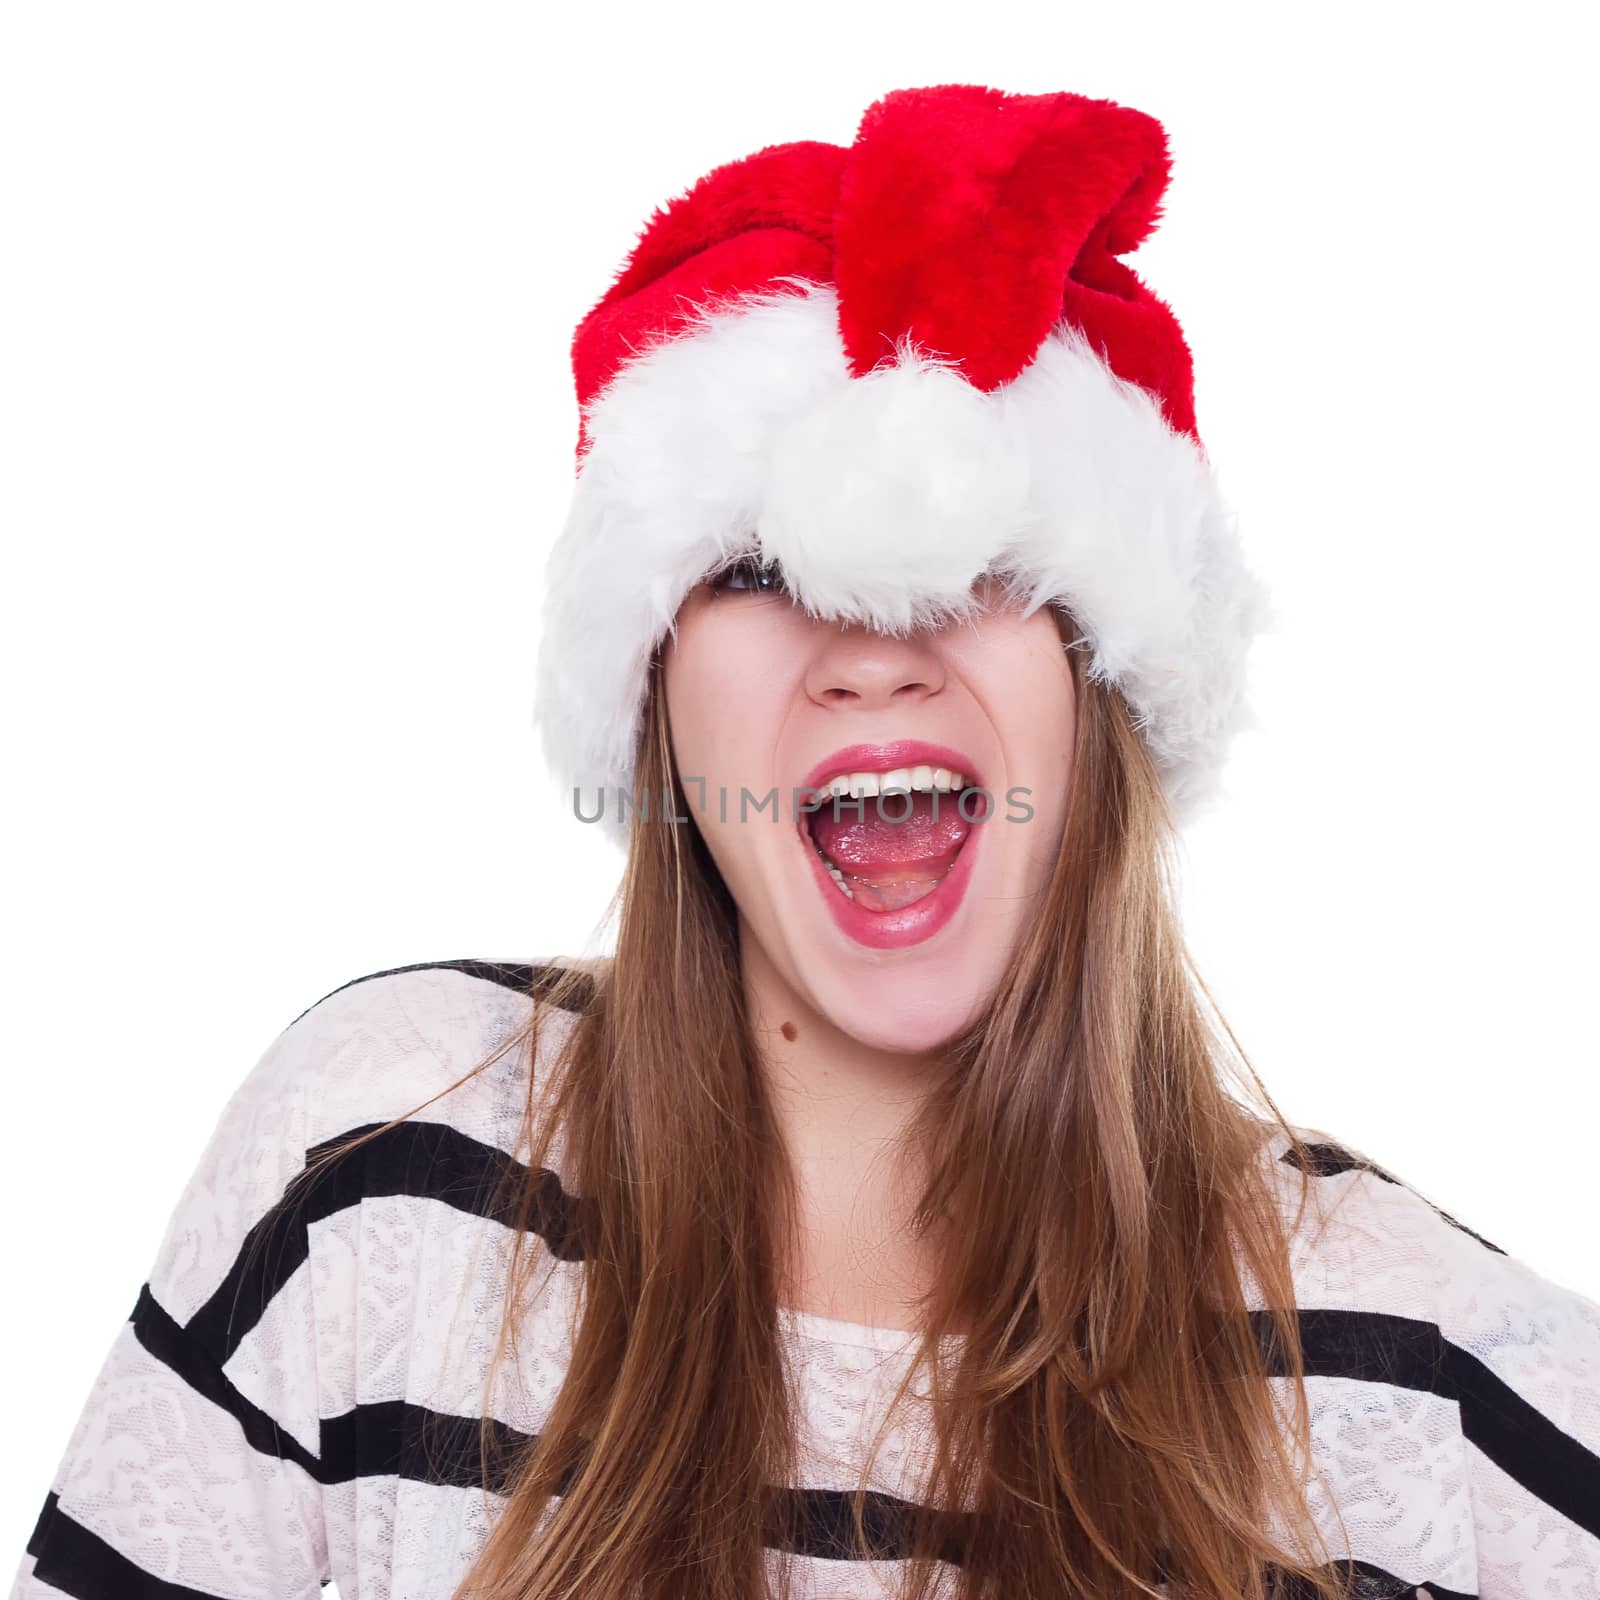 Expressive emotional girl in a Christmas hat on white background by victosha